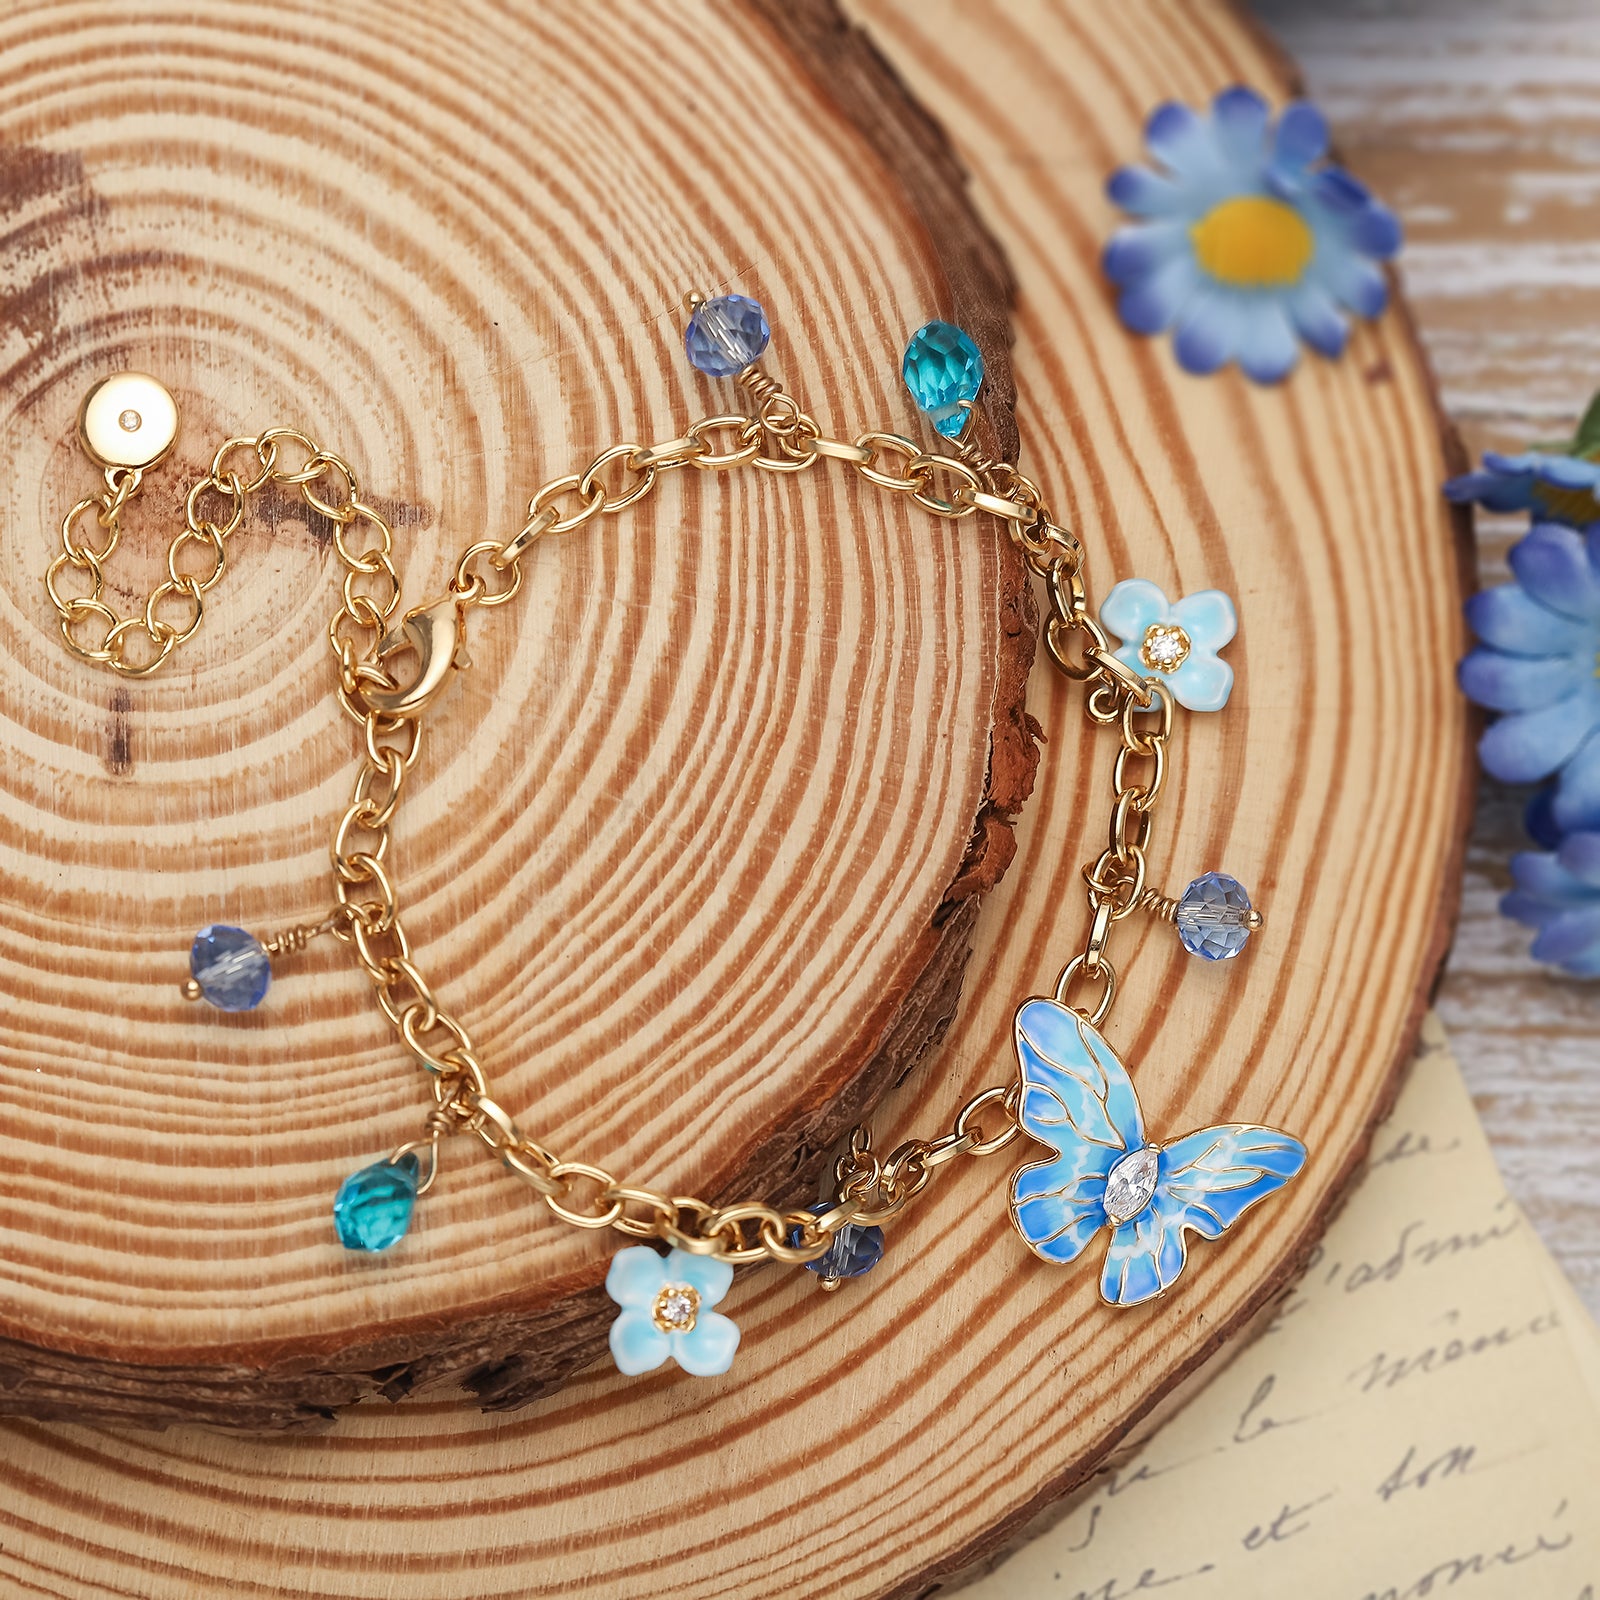 Blue Morpho Butterfly Gold Bracelet Gift Set with Gift Wrapping